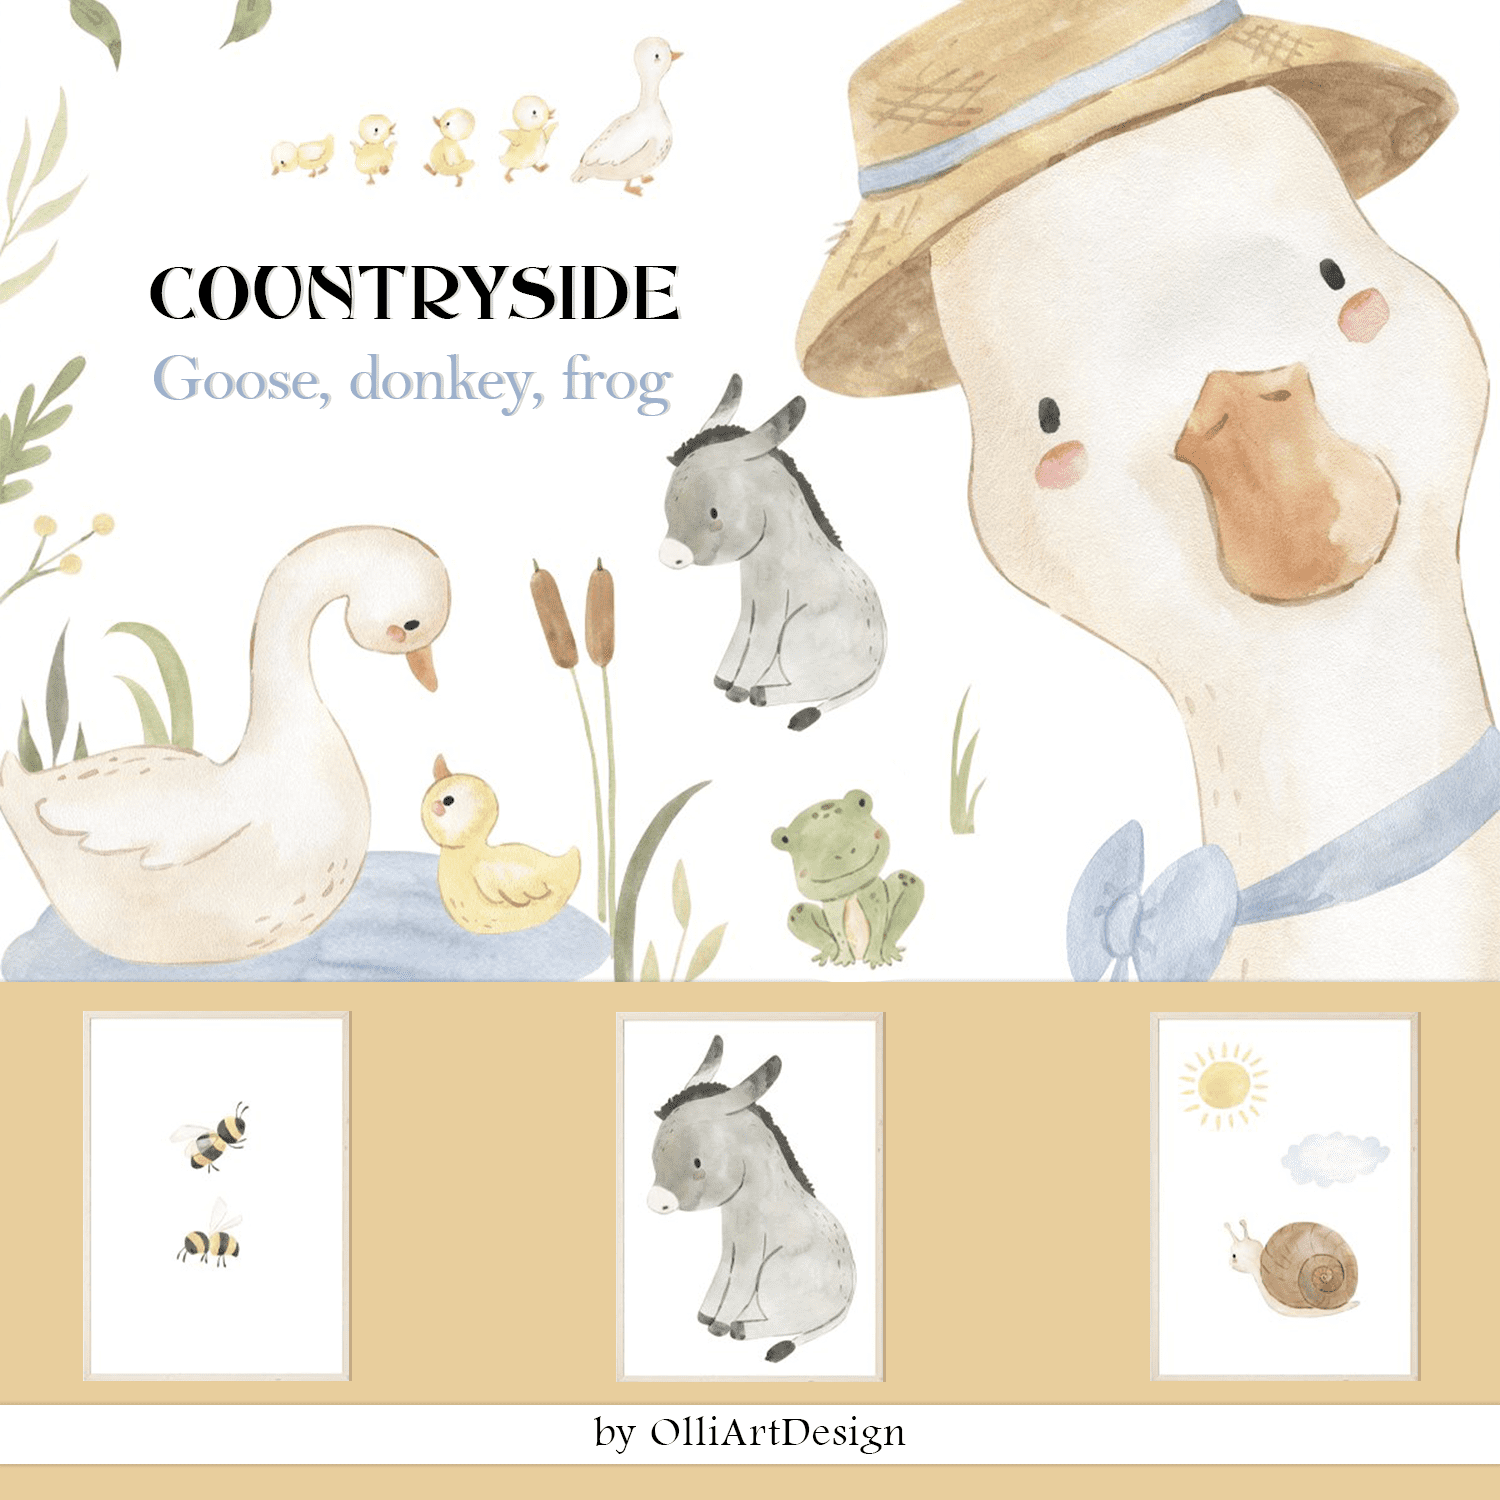 COUNTRYSIDE. Goose, Donkey, Frog cover image.